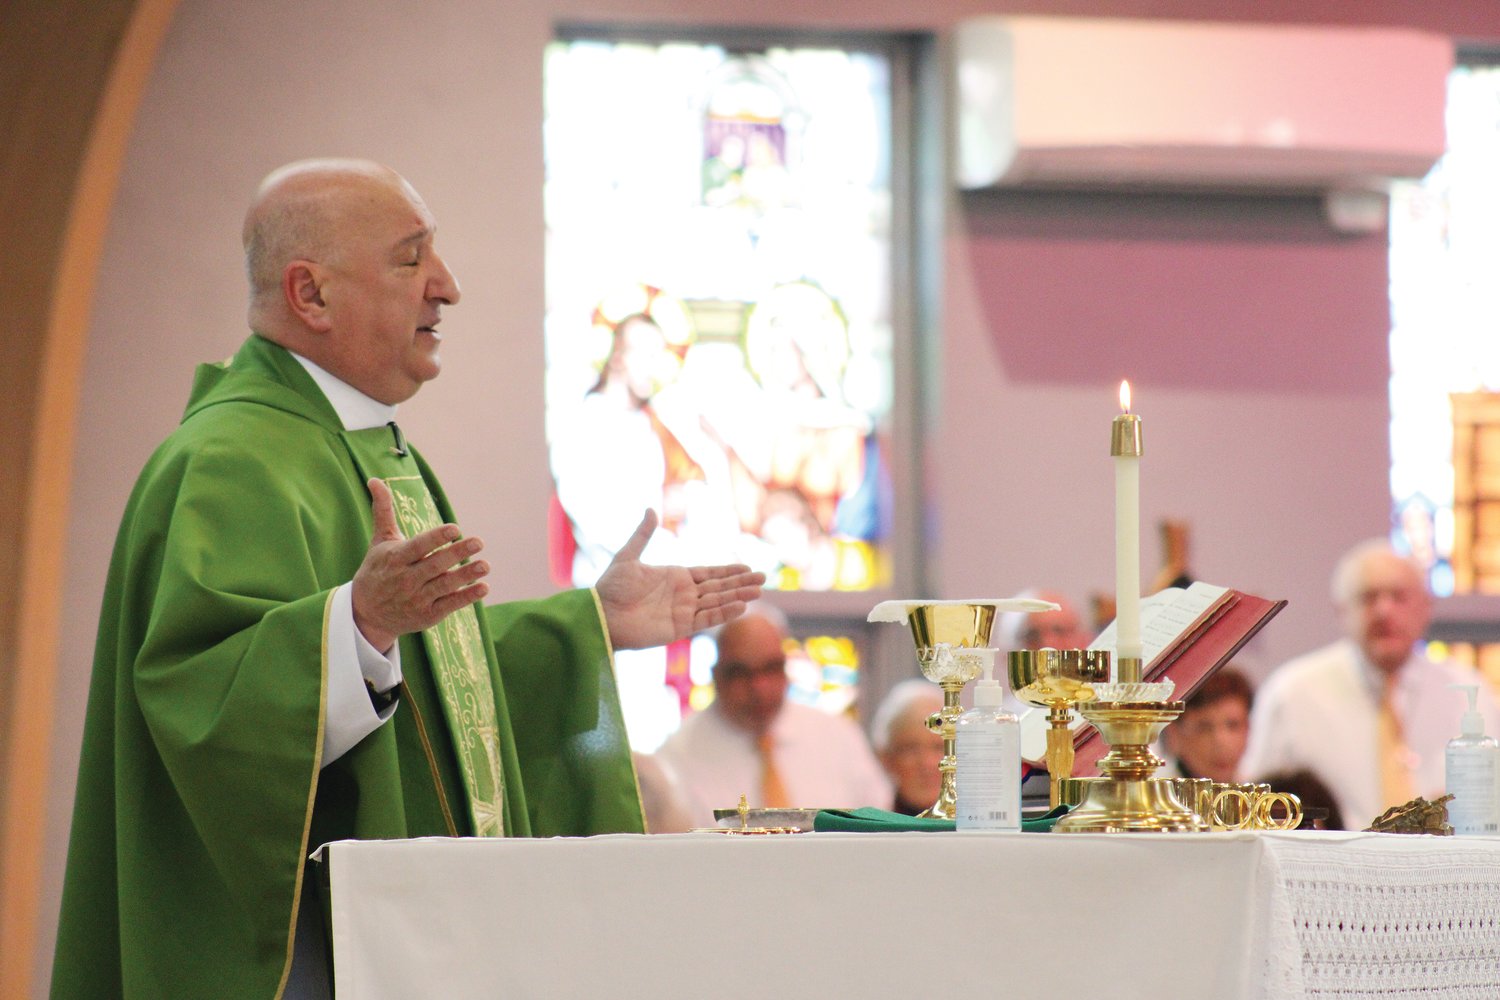 Father Marciano celebrates Holy Mass at St. Kevin Church, as the choir sings, during a memorial Mass for all those who perished in the Station Nightclub Fire, twenty years ago in West Warwick. The pastor expressed his gratitude to the emotional and spiritual support given by the first responders and those who helped the survivors and the families of the victims.